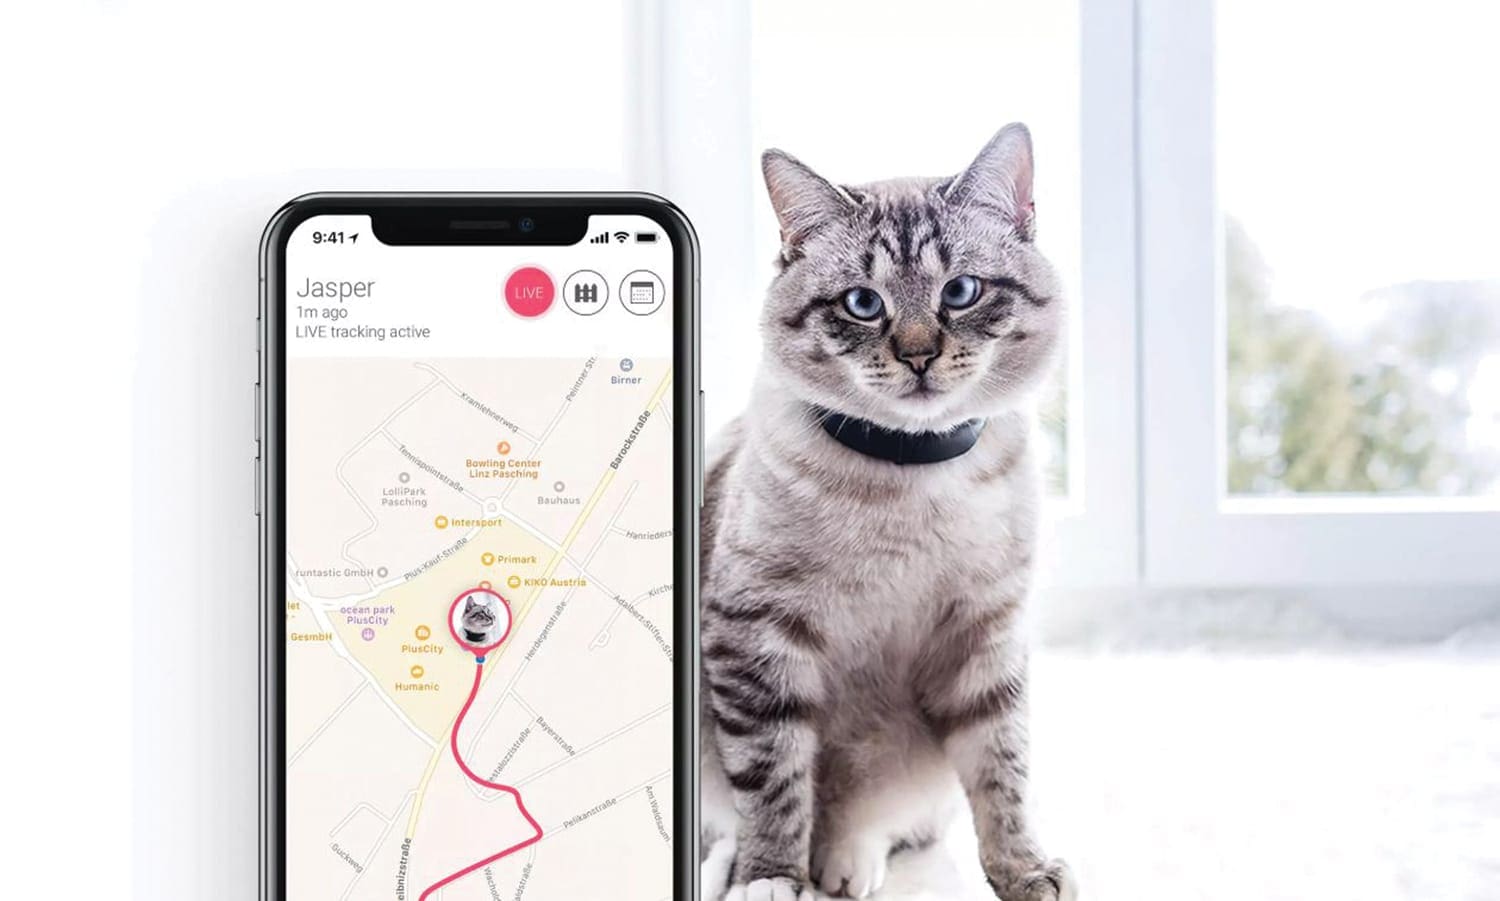 pet tracker displayed with smartphone and cat